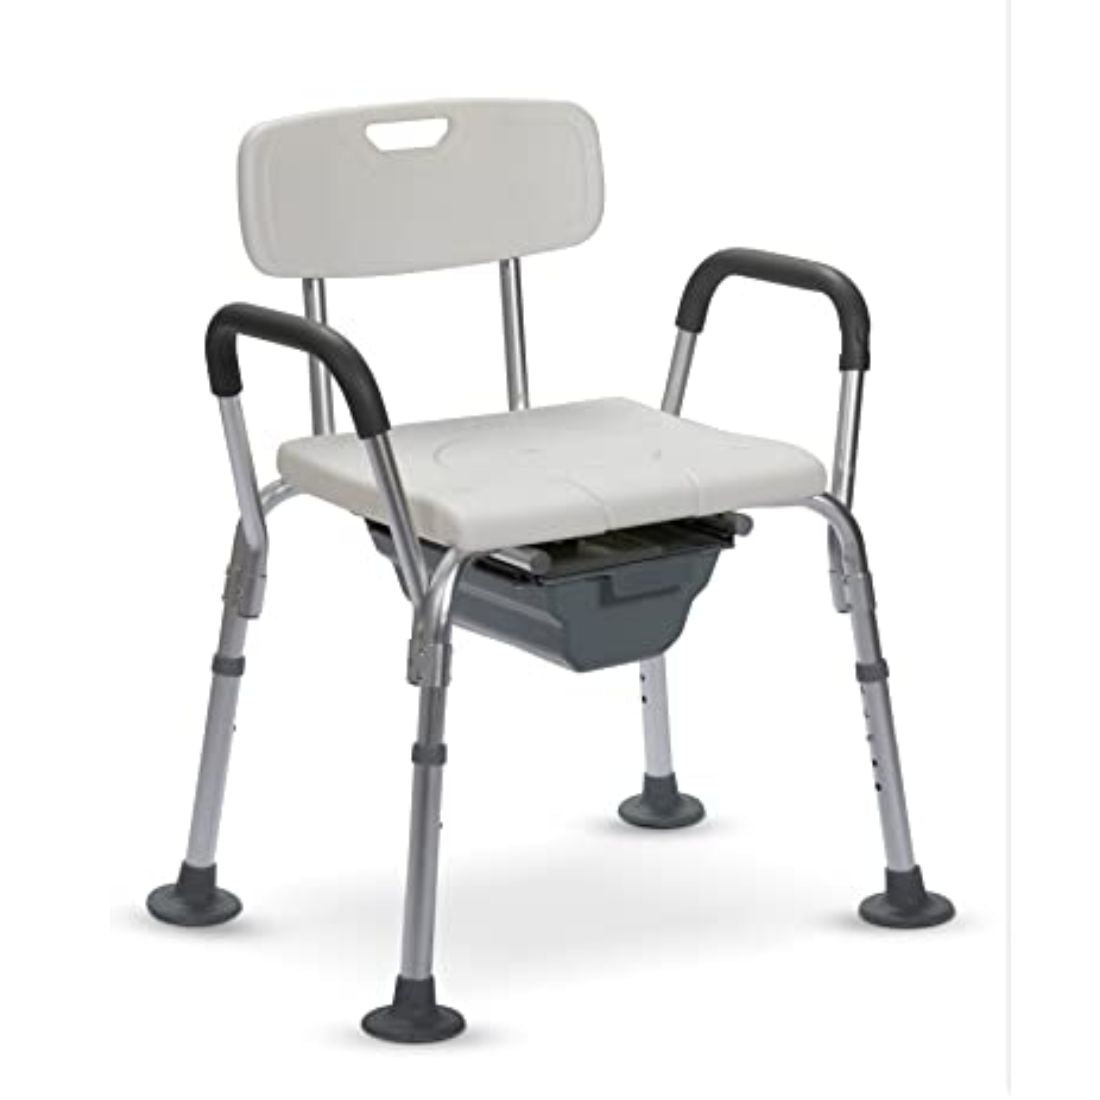 Buy Bath Chair + Commode Chair - Multi Purpose Commode Chair Price in ...